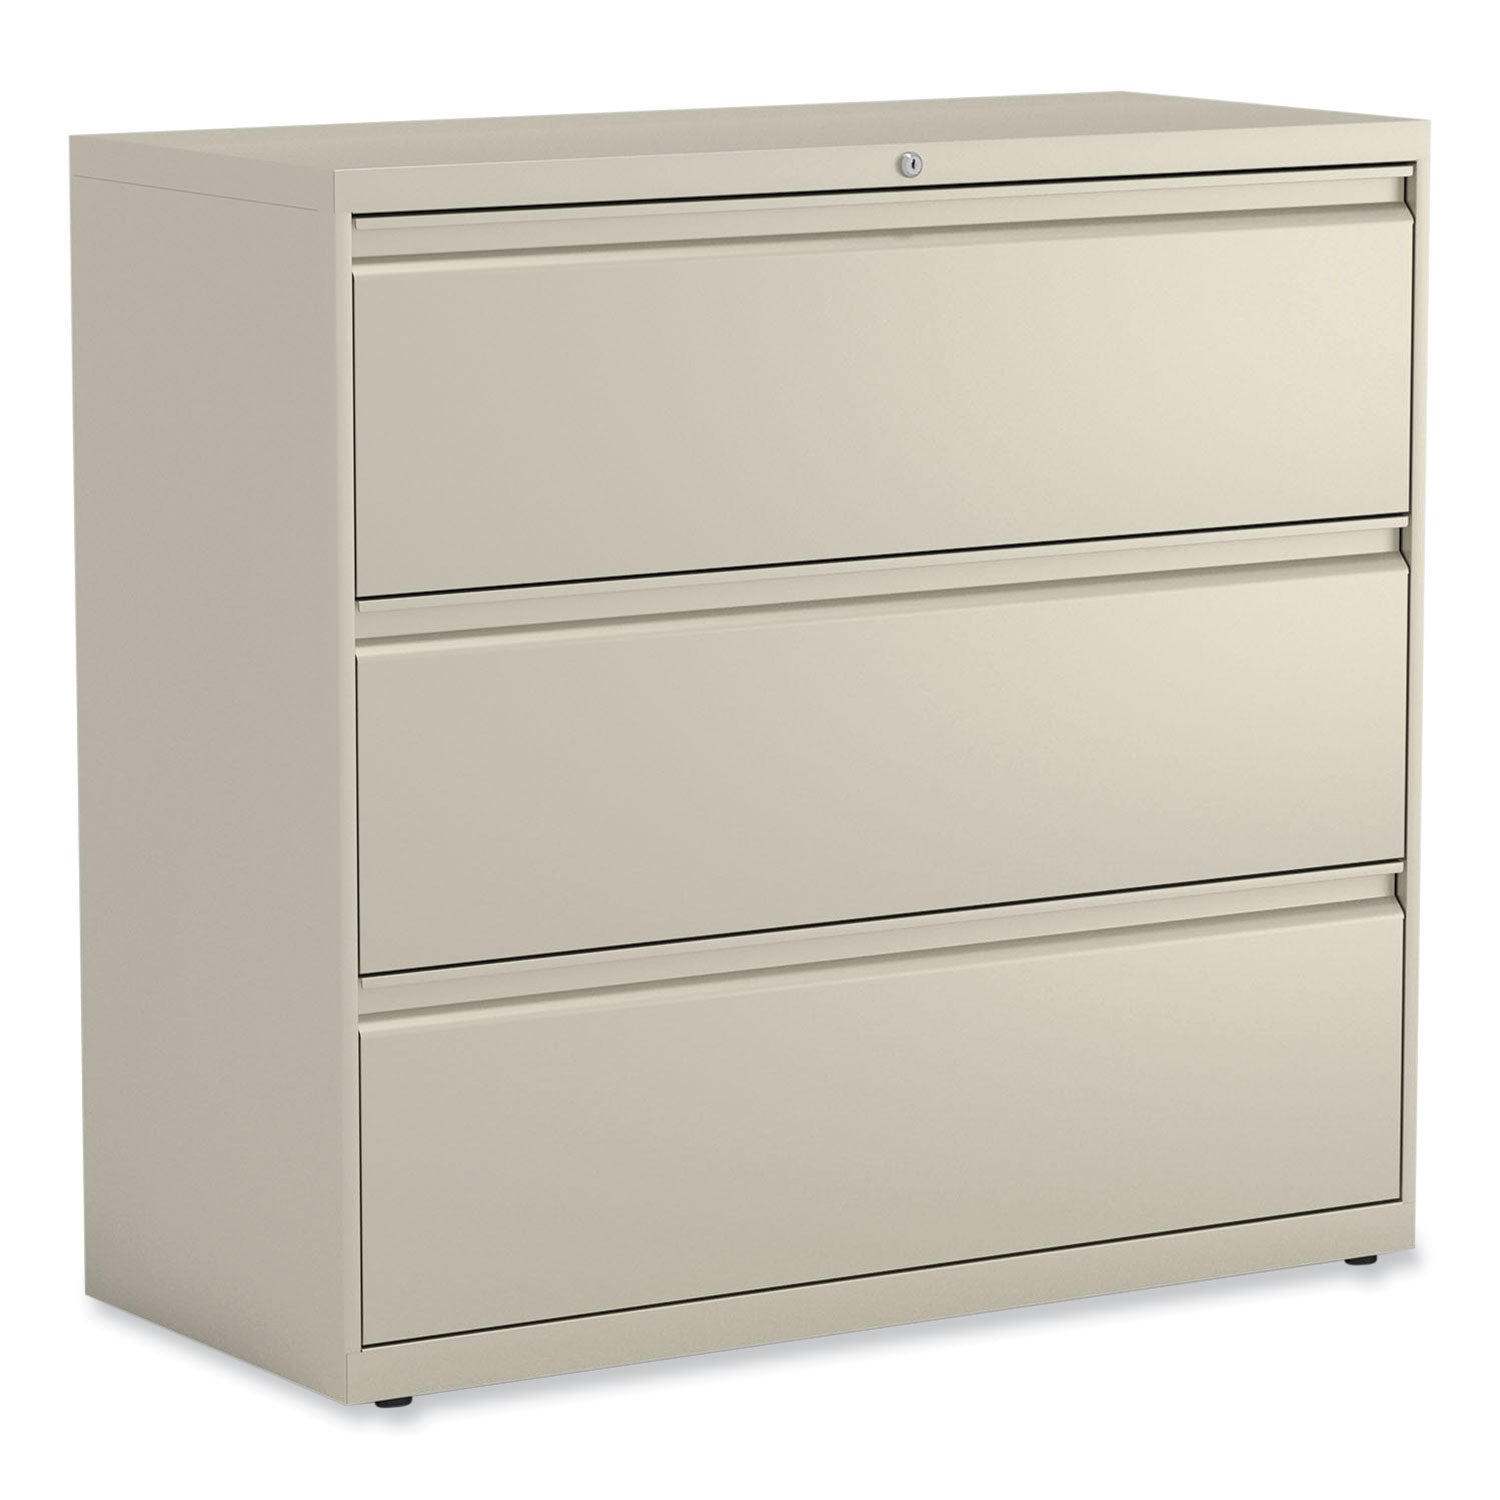 lateral-file-3-legal-letter-a4-a5-size-file-drawers-putty-42-x-1863-x-4025_alehlf4241py - 1